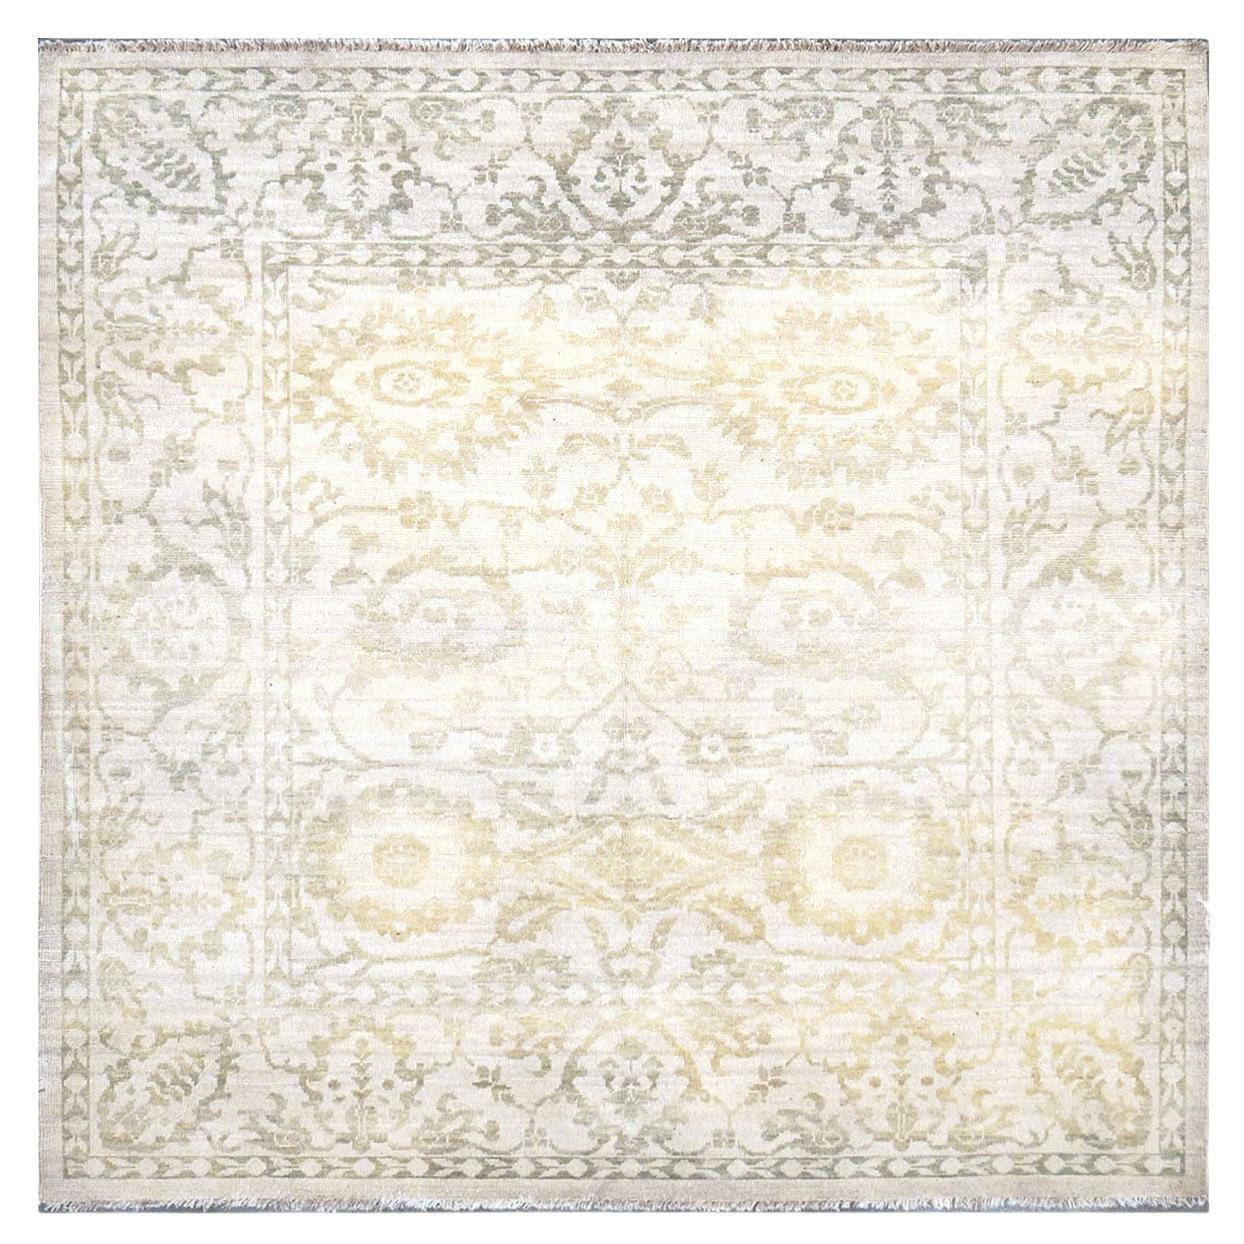 21st Century Persian Sultanabad 6x6 Ivory & Green Square Handmade Area Rug